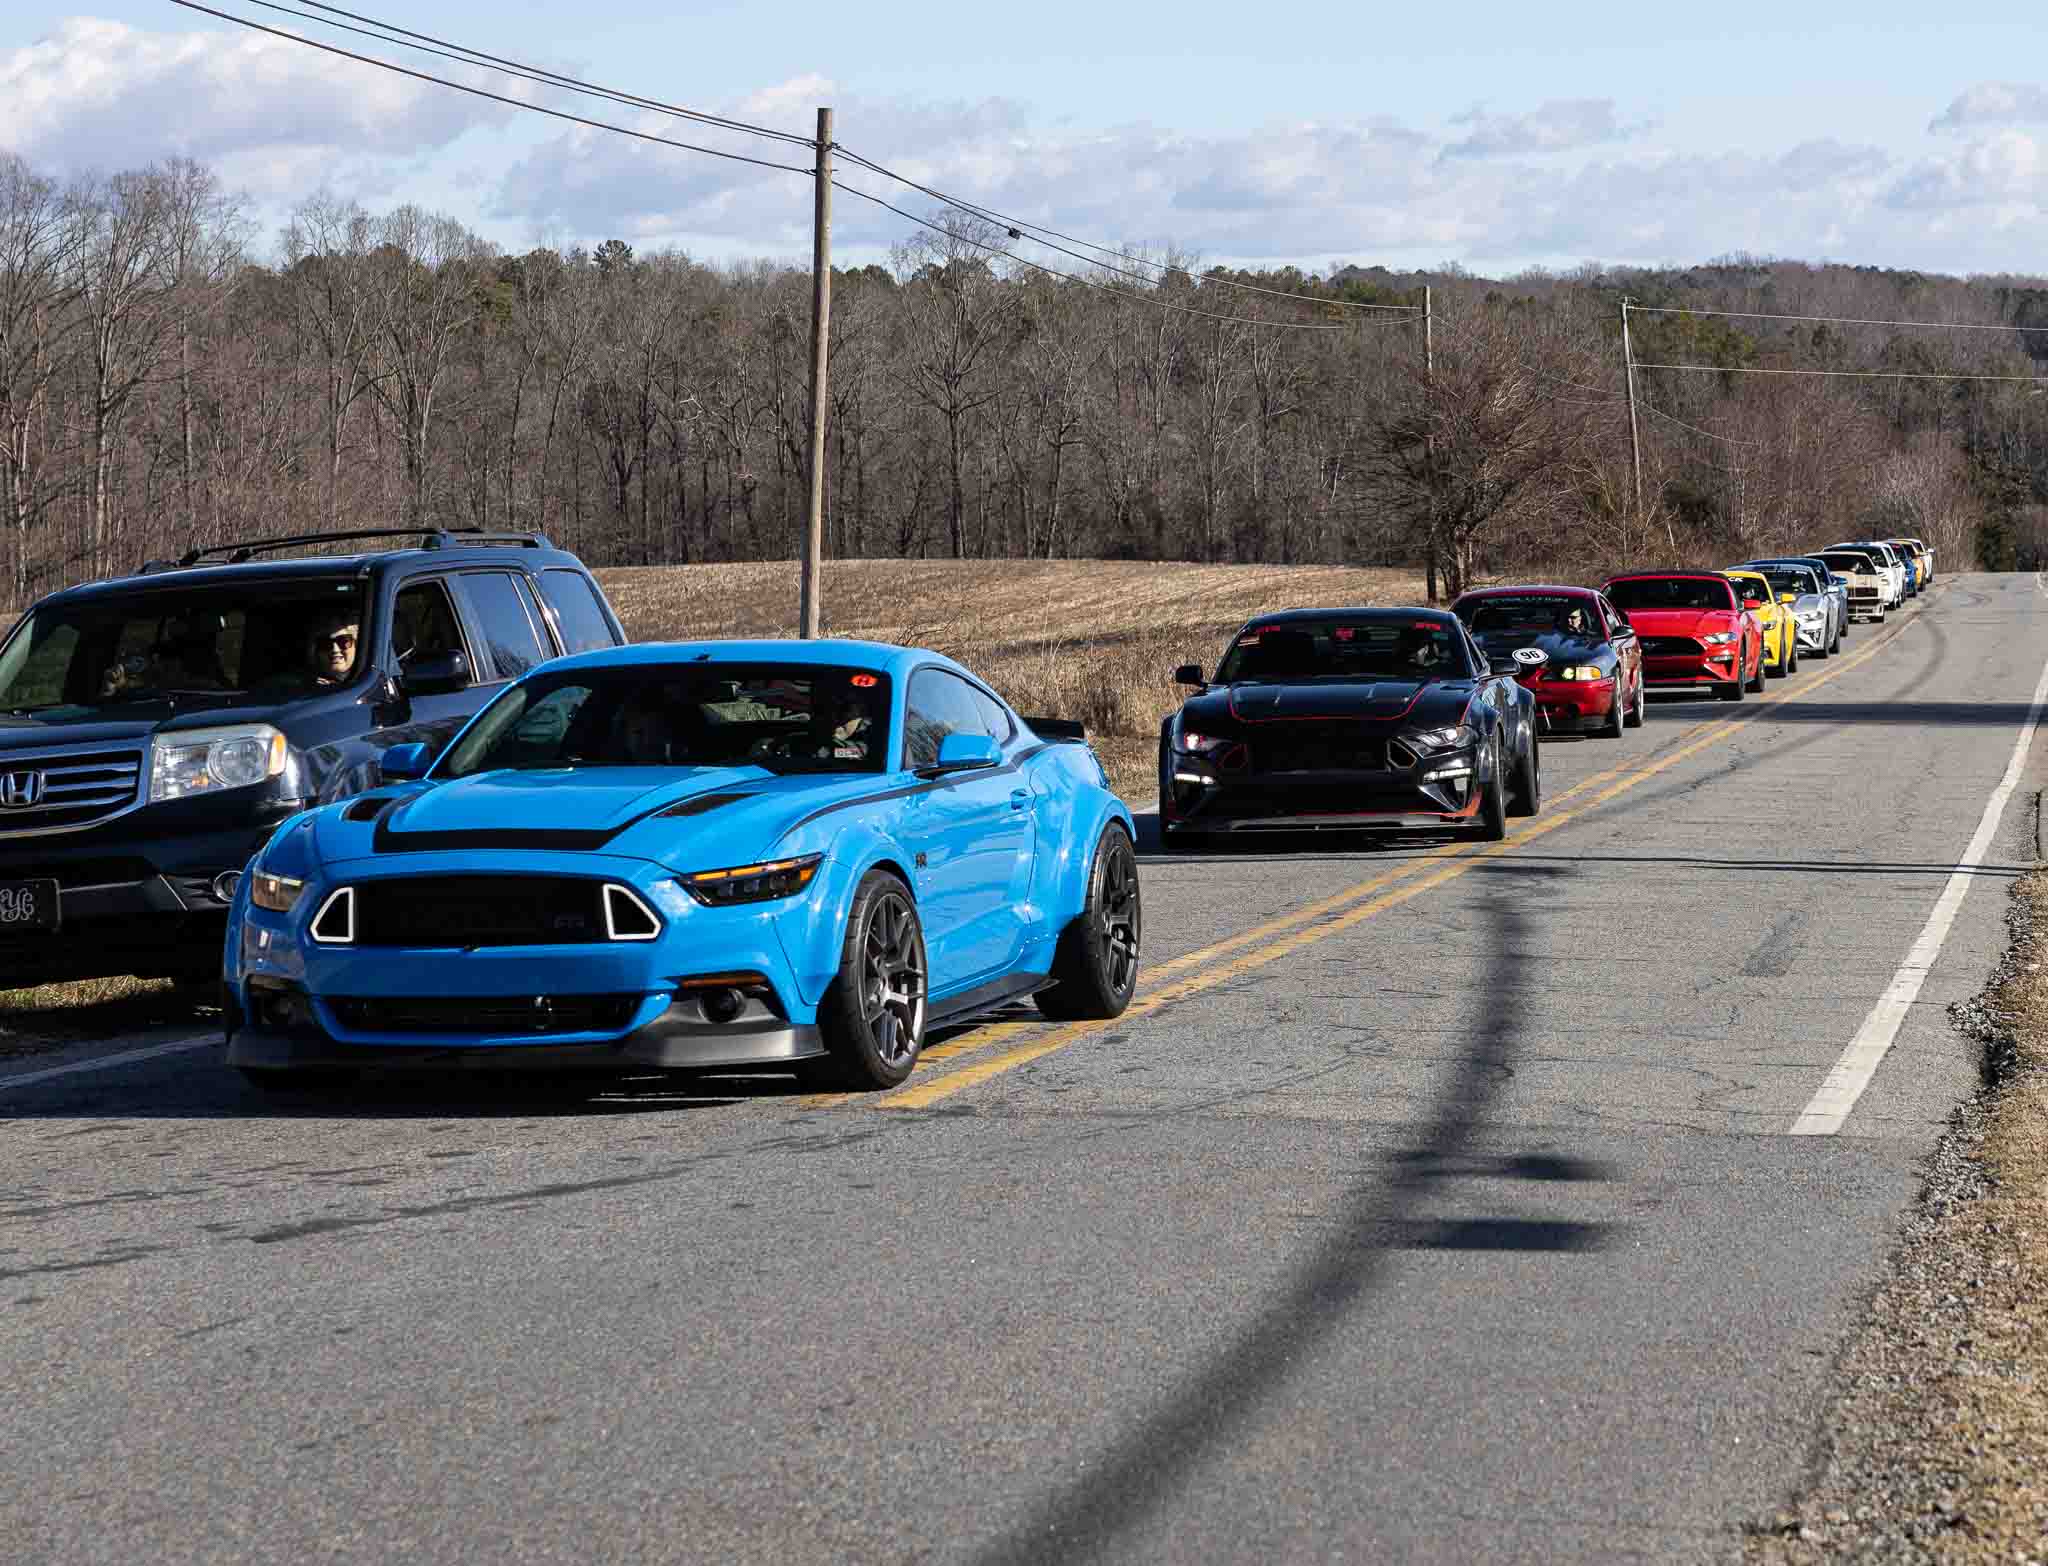 Mustang owners cruise to the RTR Lab